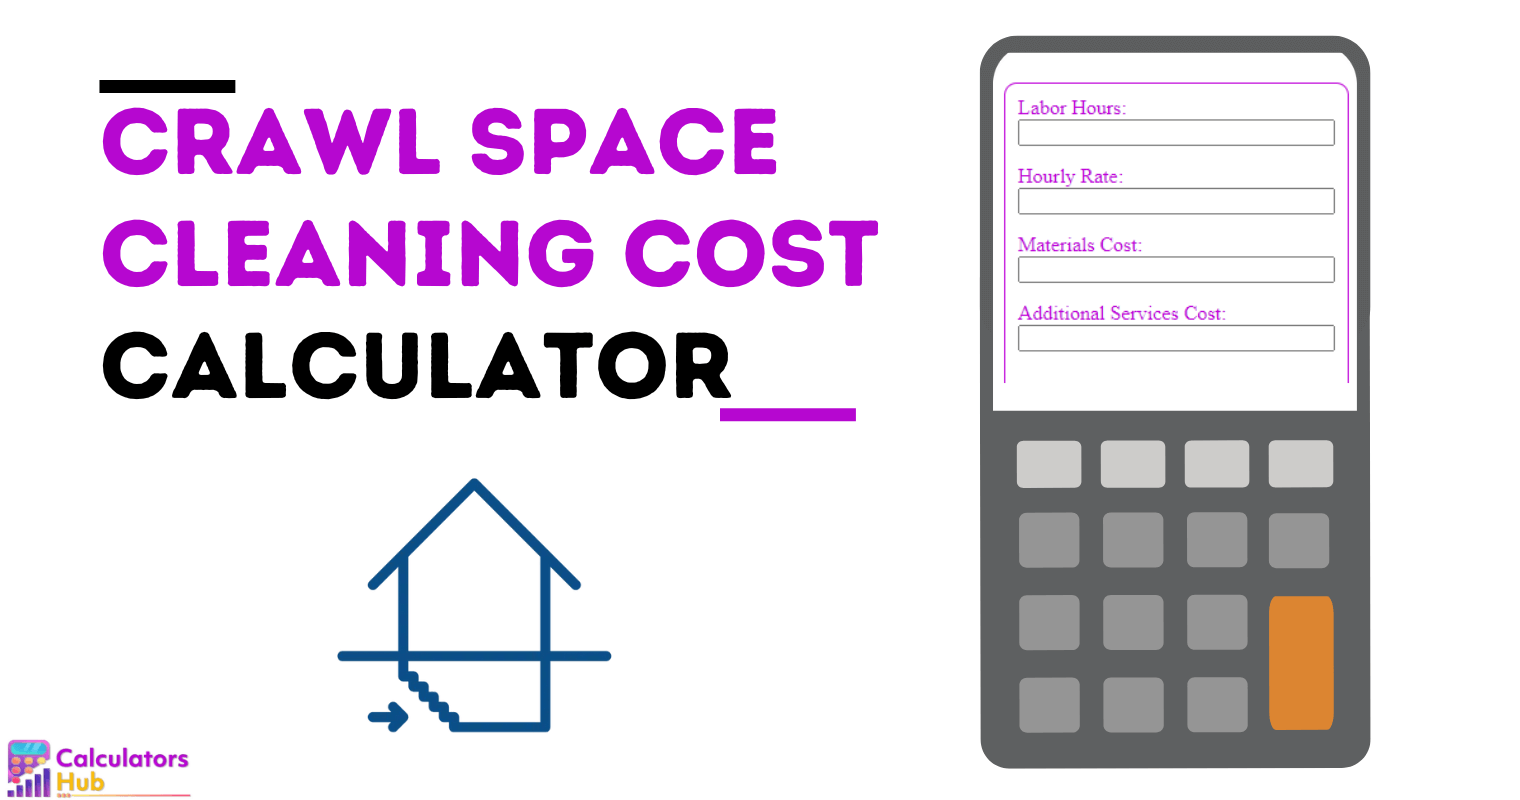 Crawl Space Cleaning Cost Calculator